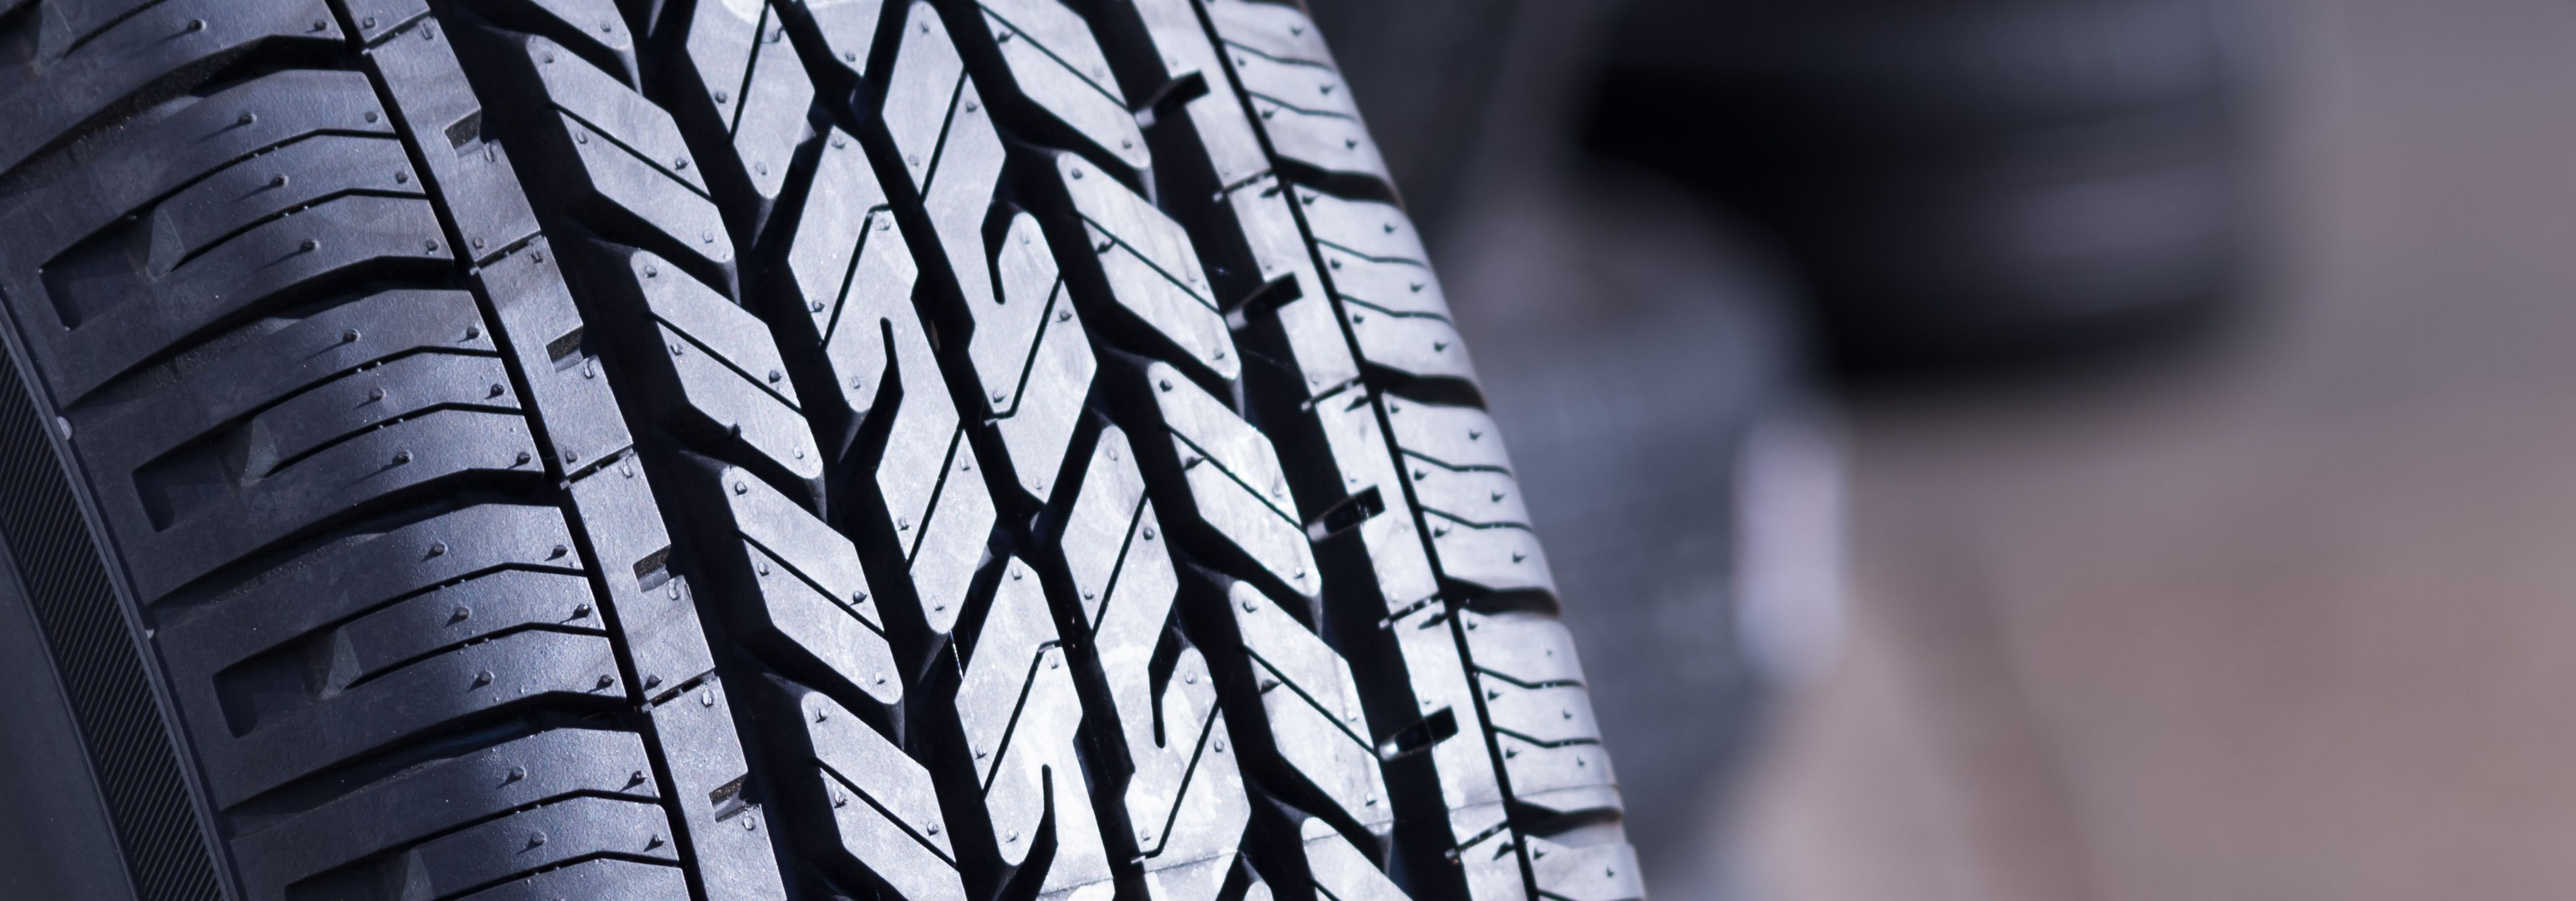 For vehicle owners and enthusiasts, ensuring the safety and performance of your car begins with maintaining proper tyres. Knowing when to replace them is crucia